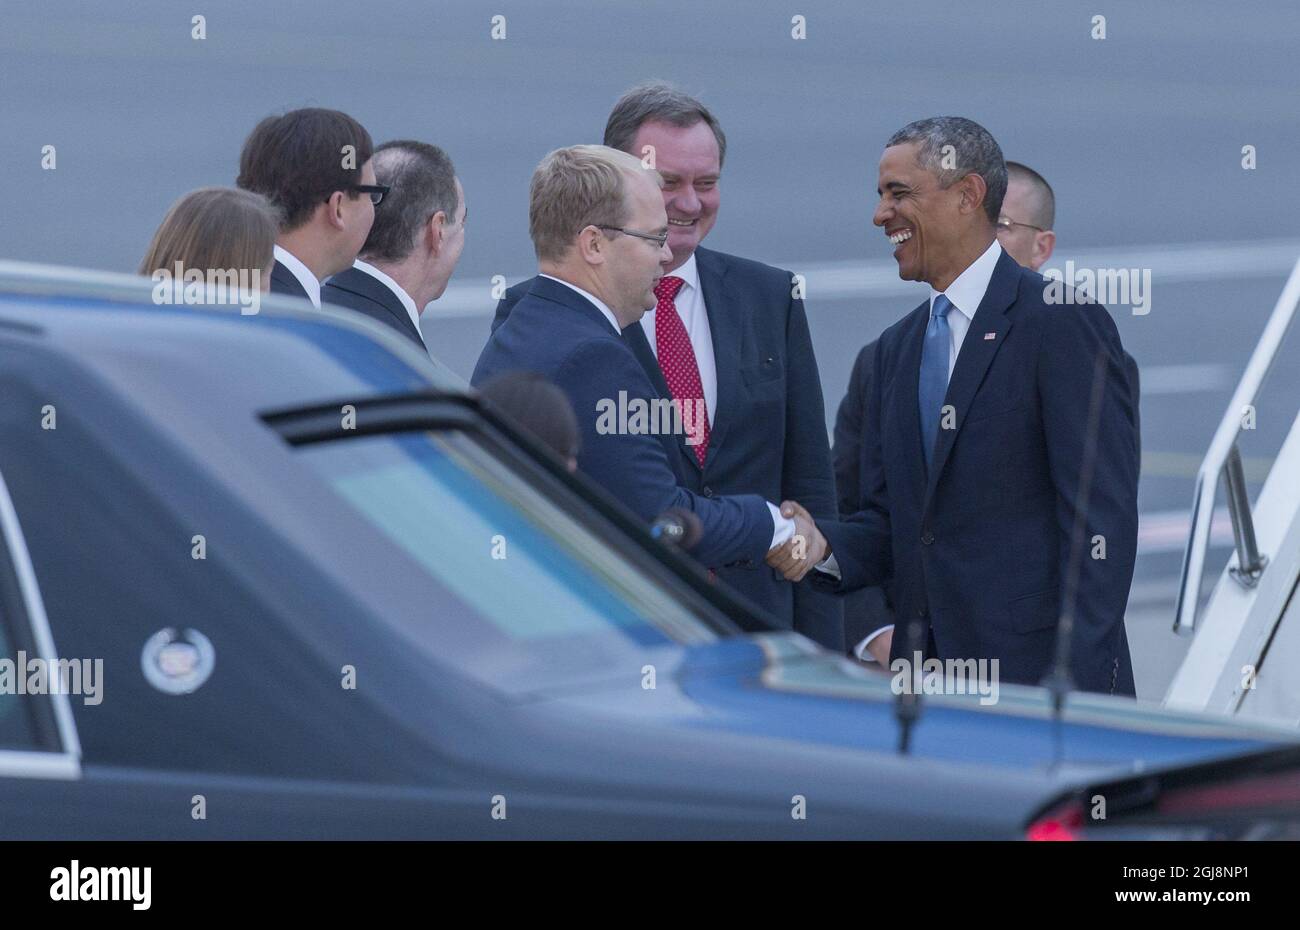 2014-09-03 President of the United States of America Barack Obama will be visiting Tallinn Estonia on the 3rd of September 2014. He will arrive early in the morning to Lennart Meri Tallinn airport where he will be greeted by Urmas Paet the minister of foreign affairs of Estonia. After arriving Barack Obama will meet with the president of Estonia Toomas Hendrik Ilves which will be followed by a pressconference held in the National Bank of Estonia. Later on Barack Obama will meet the prime minister of Estonia Taavi RÂ›ivas at the Stenbock house. Barack Obama, Toomas Hendrik Ilves, president of  Stock Photo